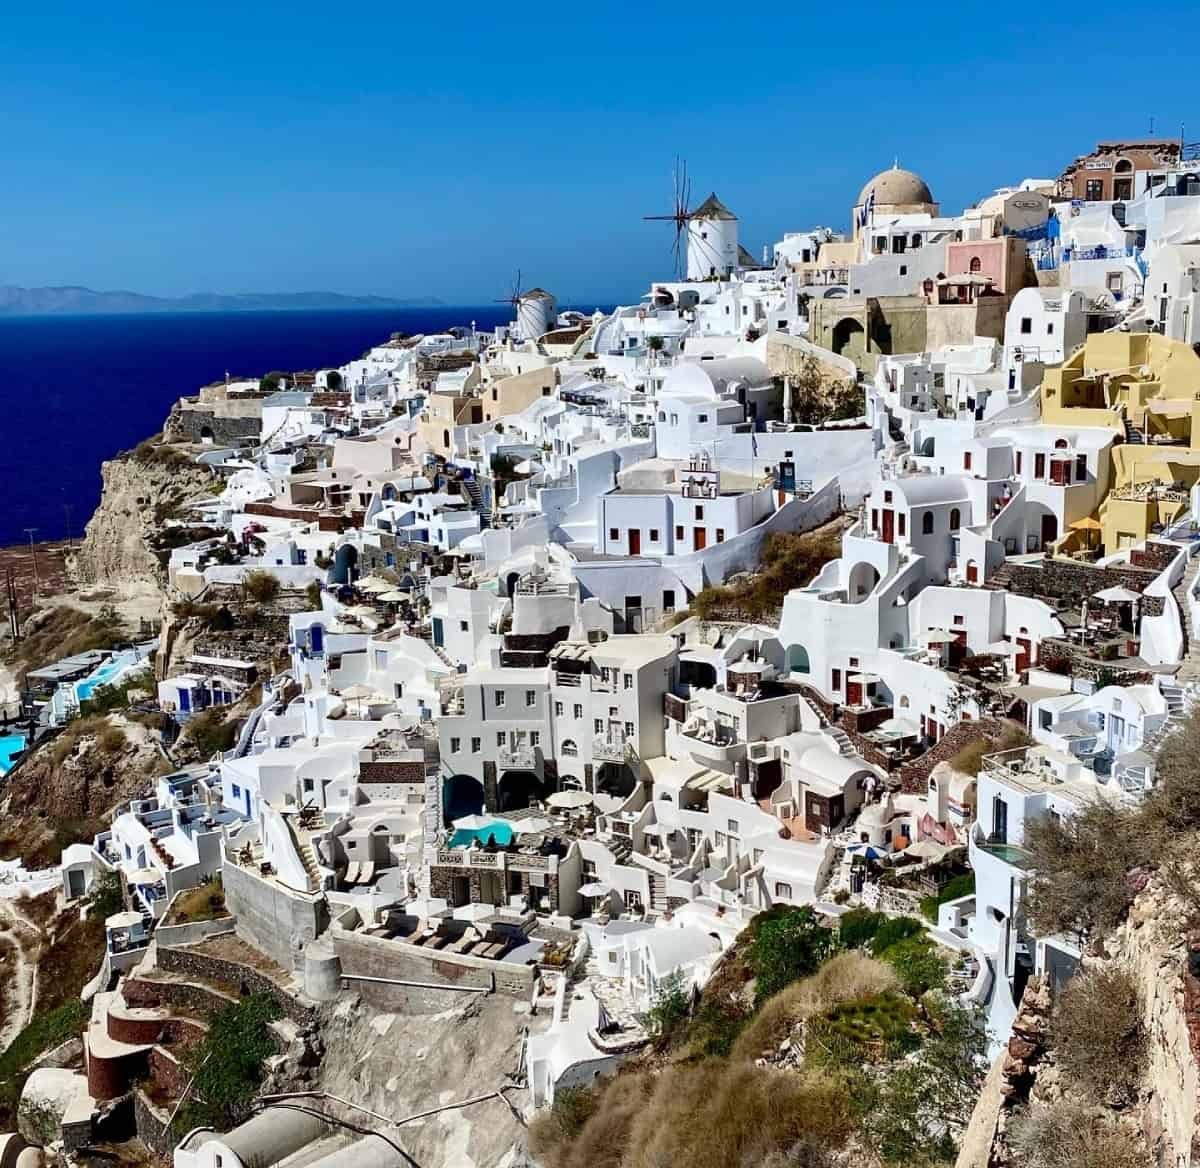 Is Oia worth visiting? A guide to Santorini's most famous town - the intense afternoon sun looking out at the windmills